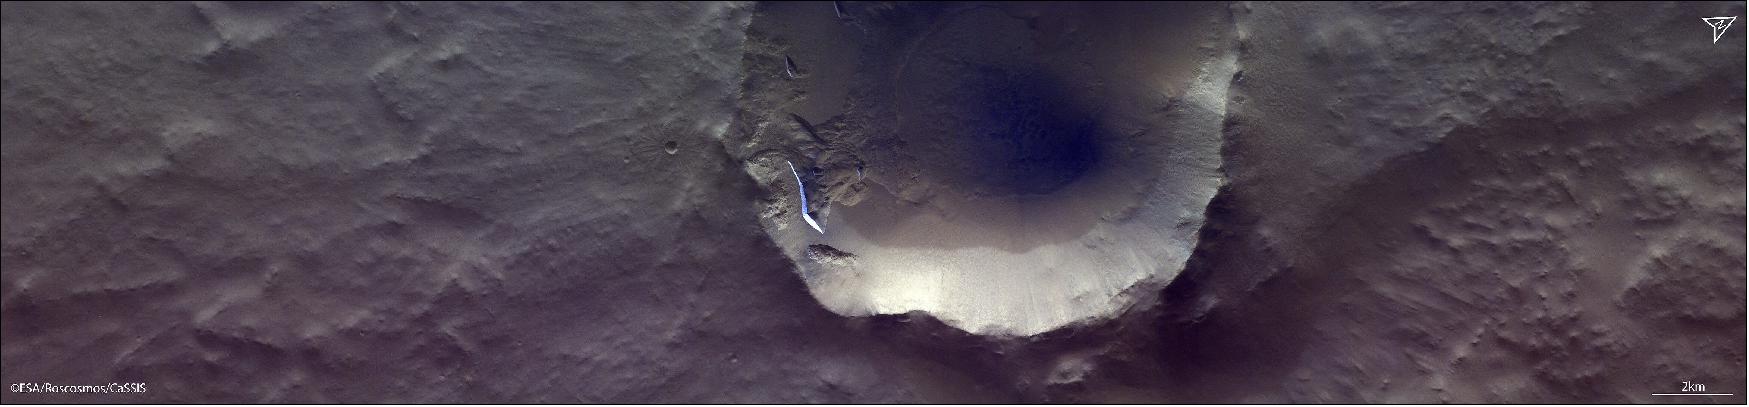 Figure 16: Despite the low light in this late evening image, several north-facing icy scarps are distinctly visible because of their covering of bright white carbon dioxide frost. The frost disappears in spring, but remains late on these scarps because of their pole-facing orientation. - This 11 km diameter crater is located in the northern plains of Mars at 55º16'51.6"N/106º25'3.4"W, north of Alba Mons (image credit: ESA/Roscosmos/CaSSIS, CC BY-SA 3.0 IGO)